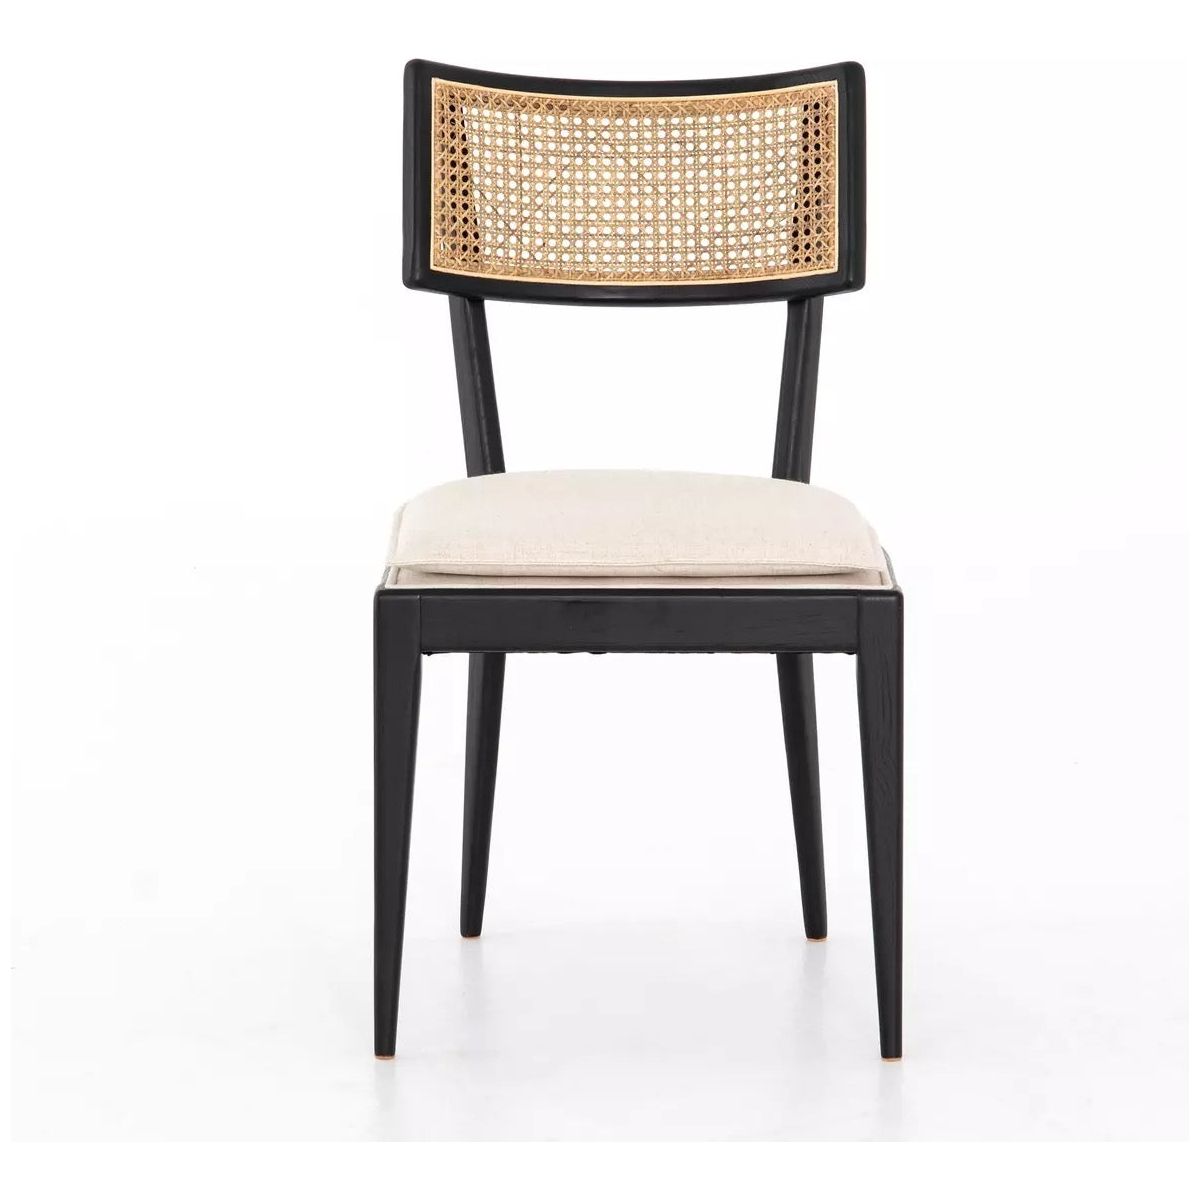 A Britt Dining Chair with a sleek black frame and tapered legs. The backrest features a woven cane design, and the padded, high-performance linen-blend seat is upholstered in light beige fabric. The chair's minimalist and elegant design stands out against the white background.